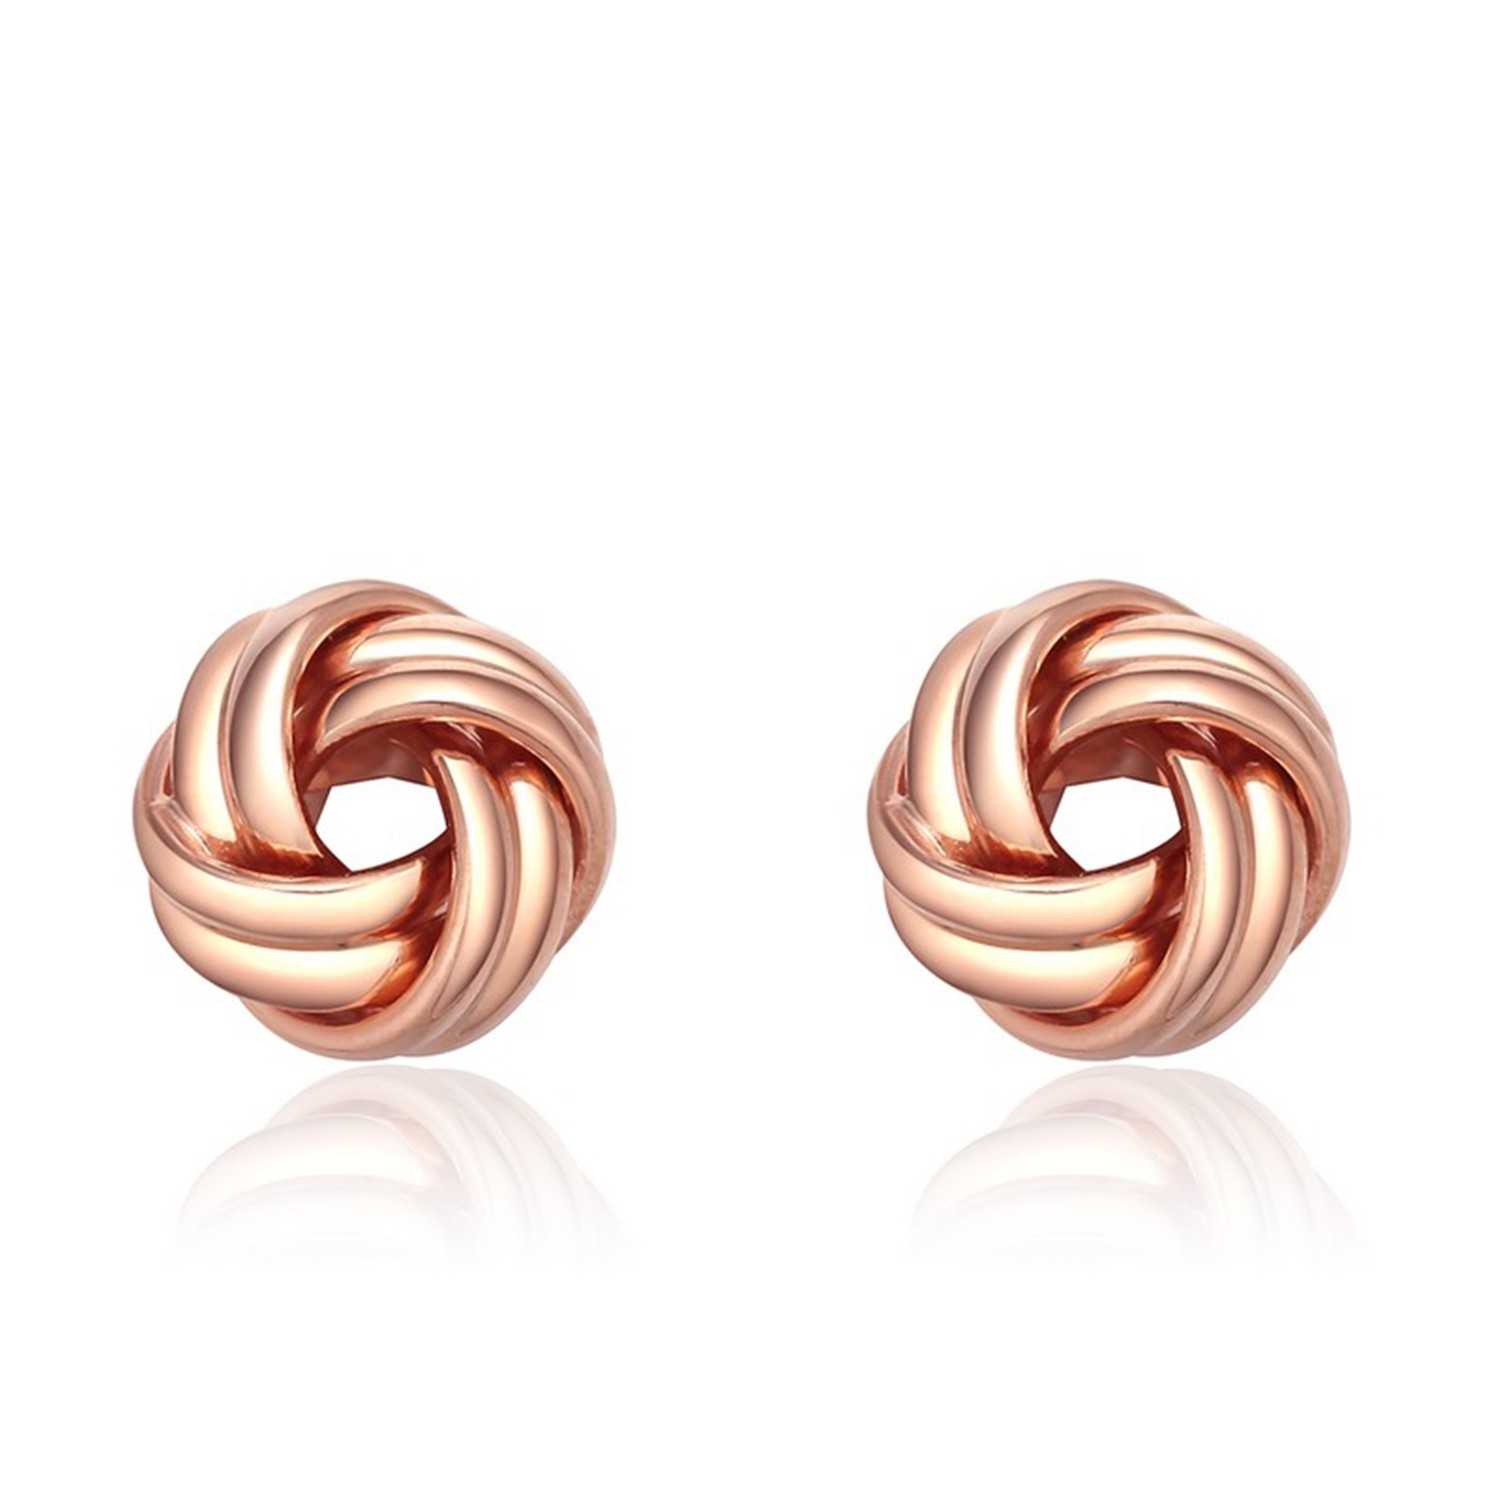 Jewelry Rose Gold Plated Sterling Sliver Hoop Stud Fashion Earrings For Women